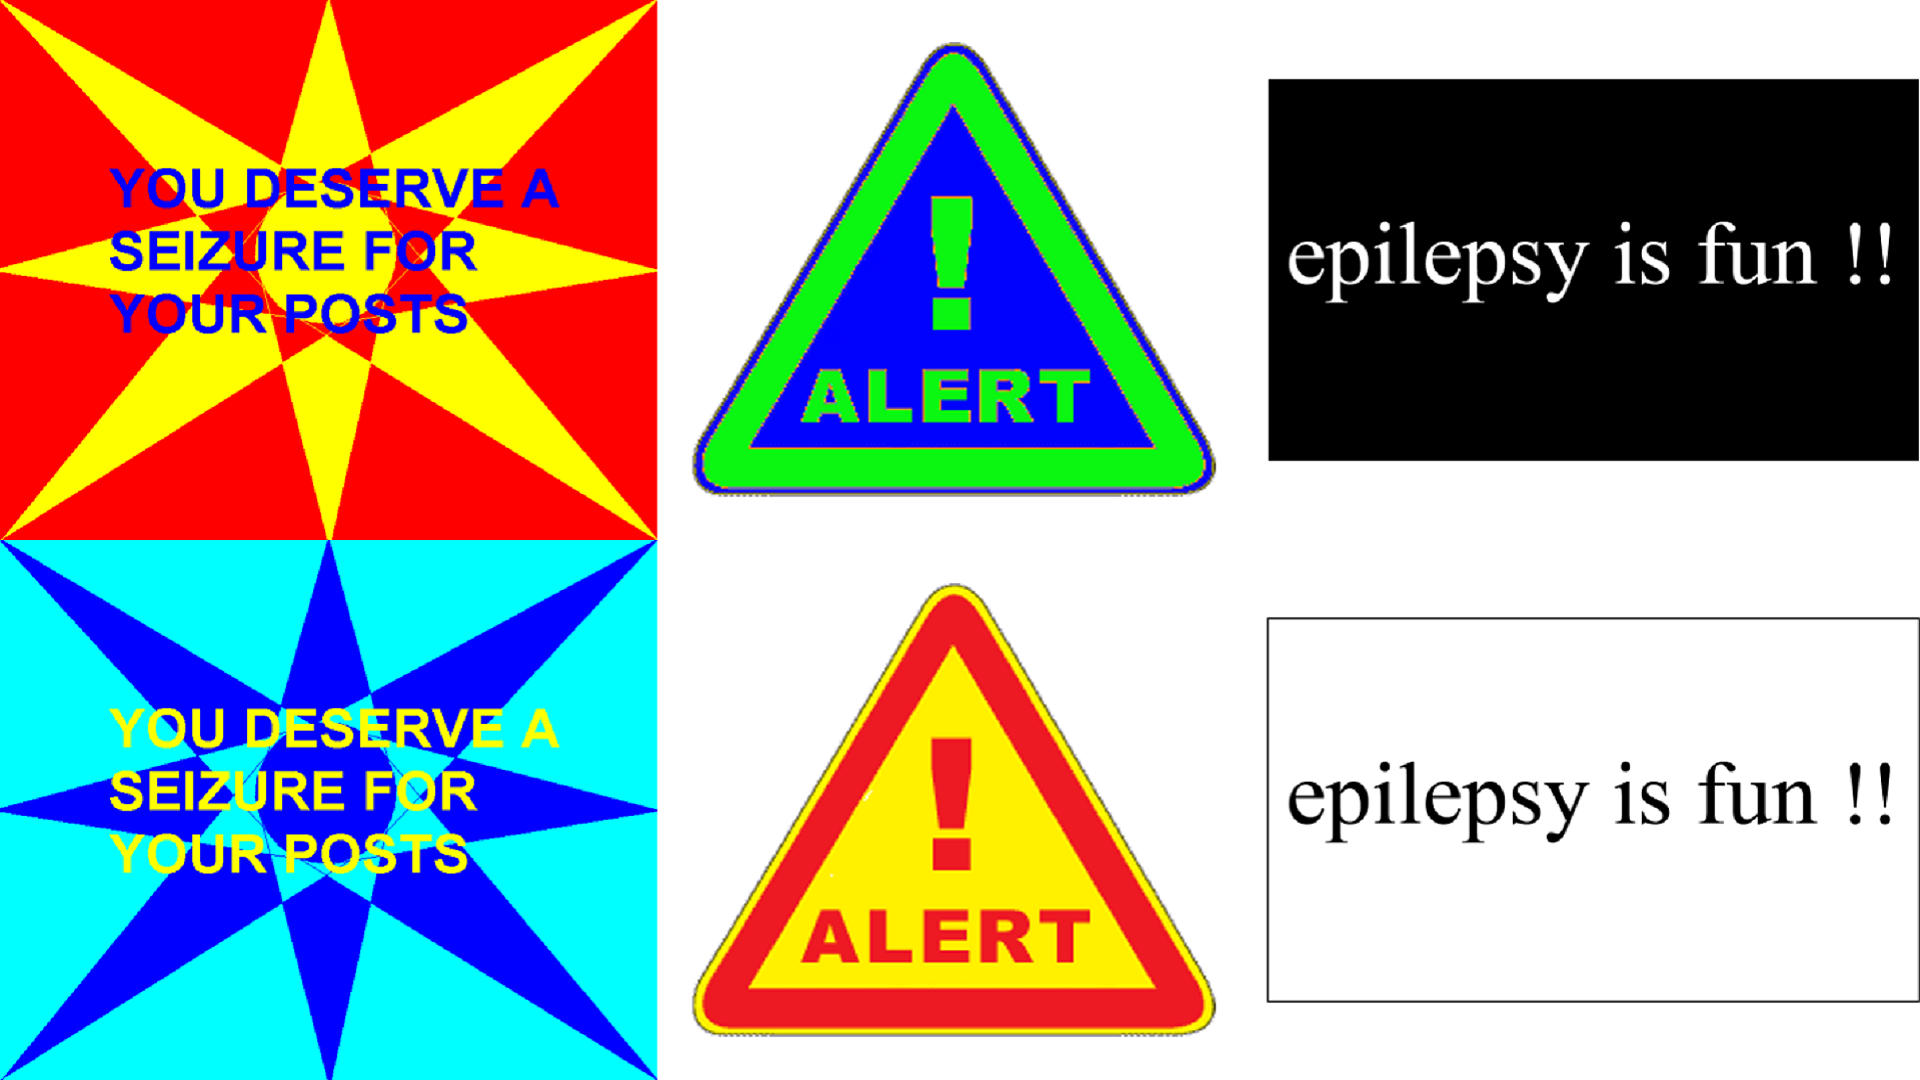 Two frames each are shown from three different GIFs. The first GIF has the message 'You deserve a seizure for your posts' shown in both frames, but the top frame is bright red and yellow while the second frame has two shades of dark blue. The second GIF is a triangular sign that says 'Alert!' and alternates between a blue-green frame and a red-yellow frame. The final GIF has the message 'epilepsy is fun!'. The color of the background behind the text is black in the first frame and white in the second.